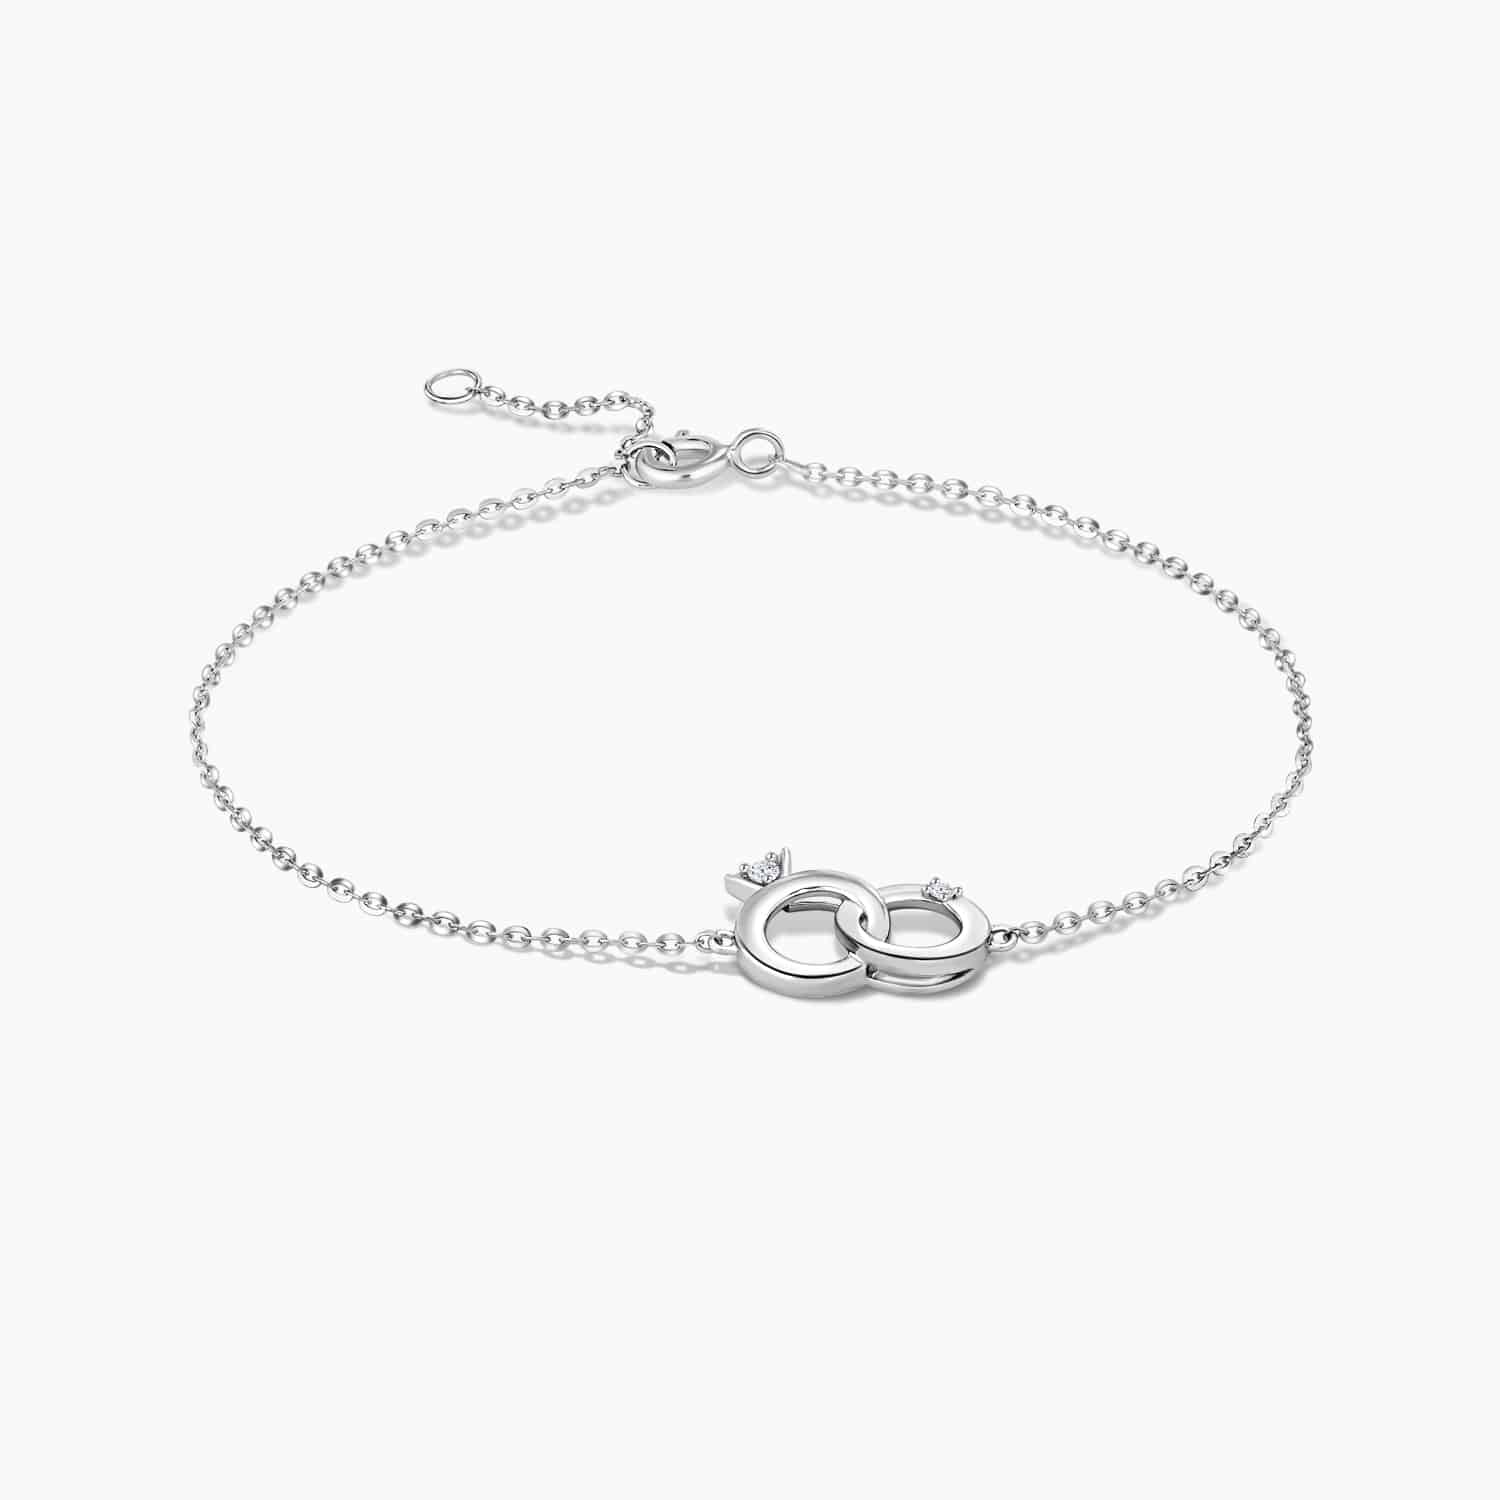 LVC BRACELETS CHARMES MODERN MINI RING features two interlocking mini rings consists of two diamonds in 14k white gold